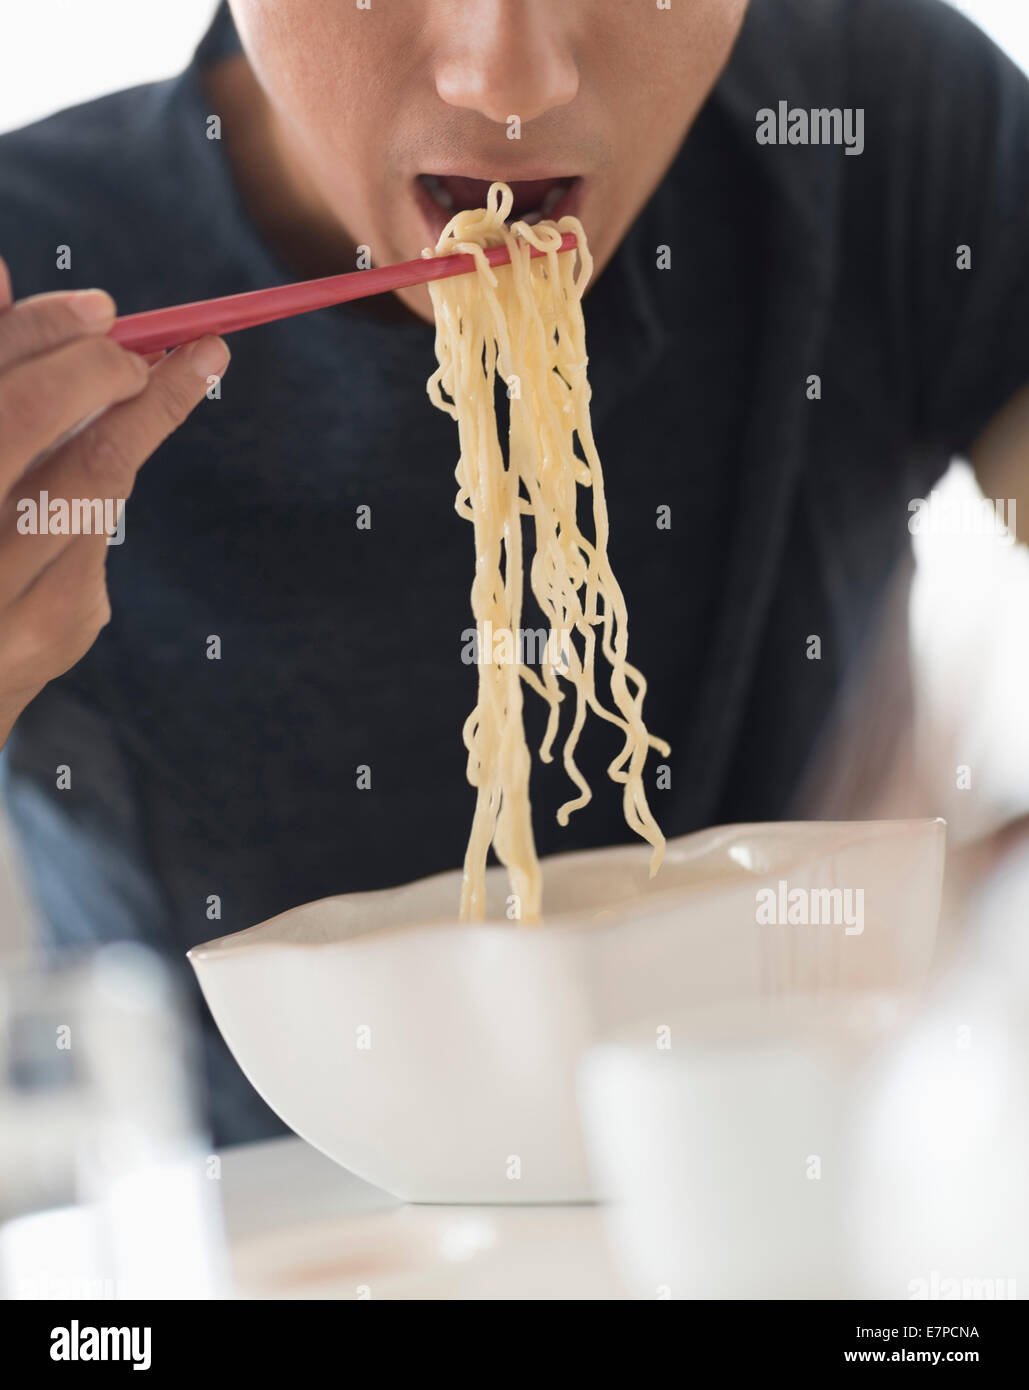 Man eating noodles with chopsticks Stock Photo